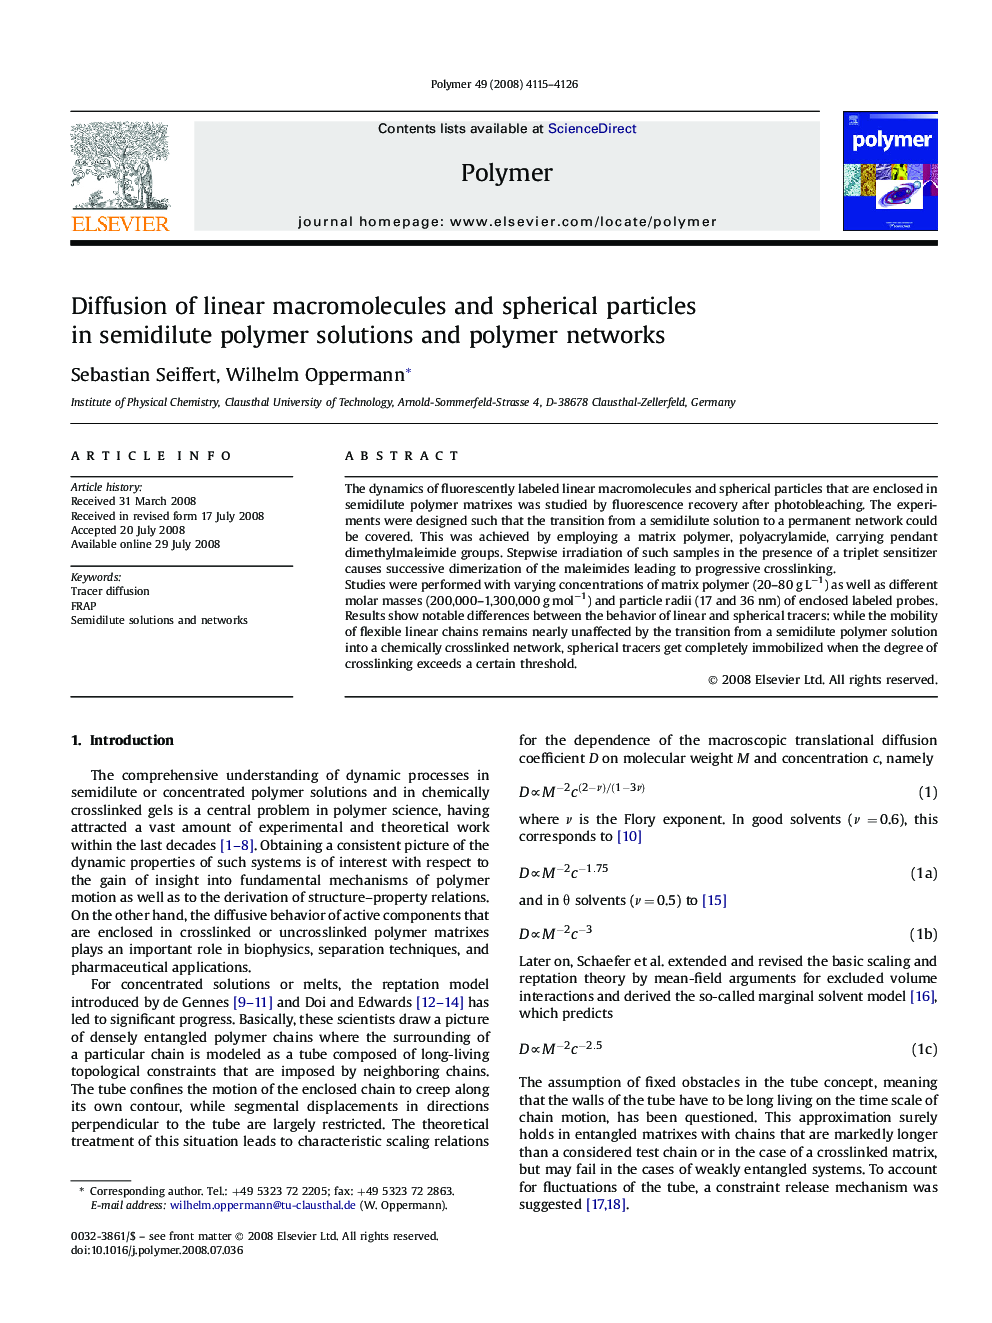 Diffusion of linear macromolecules and spherical particles in semidilute polymer solutions and polymer networks